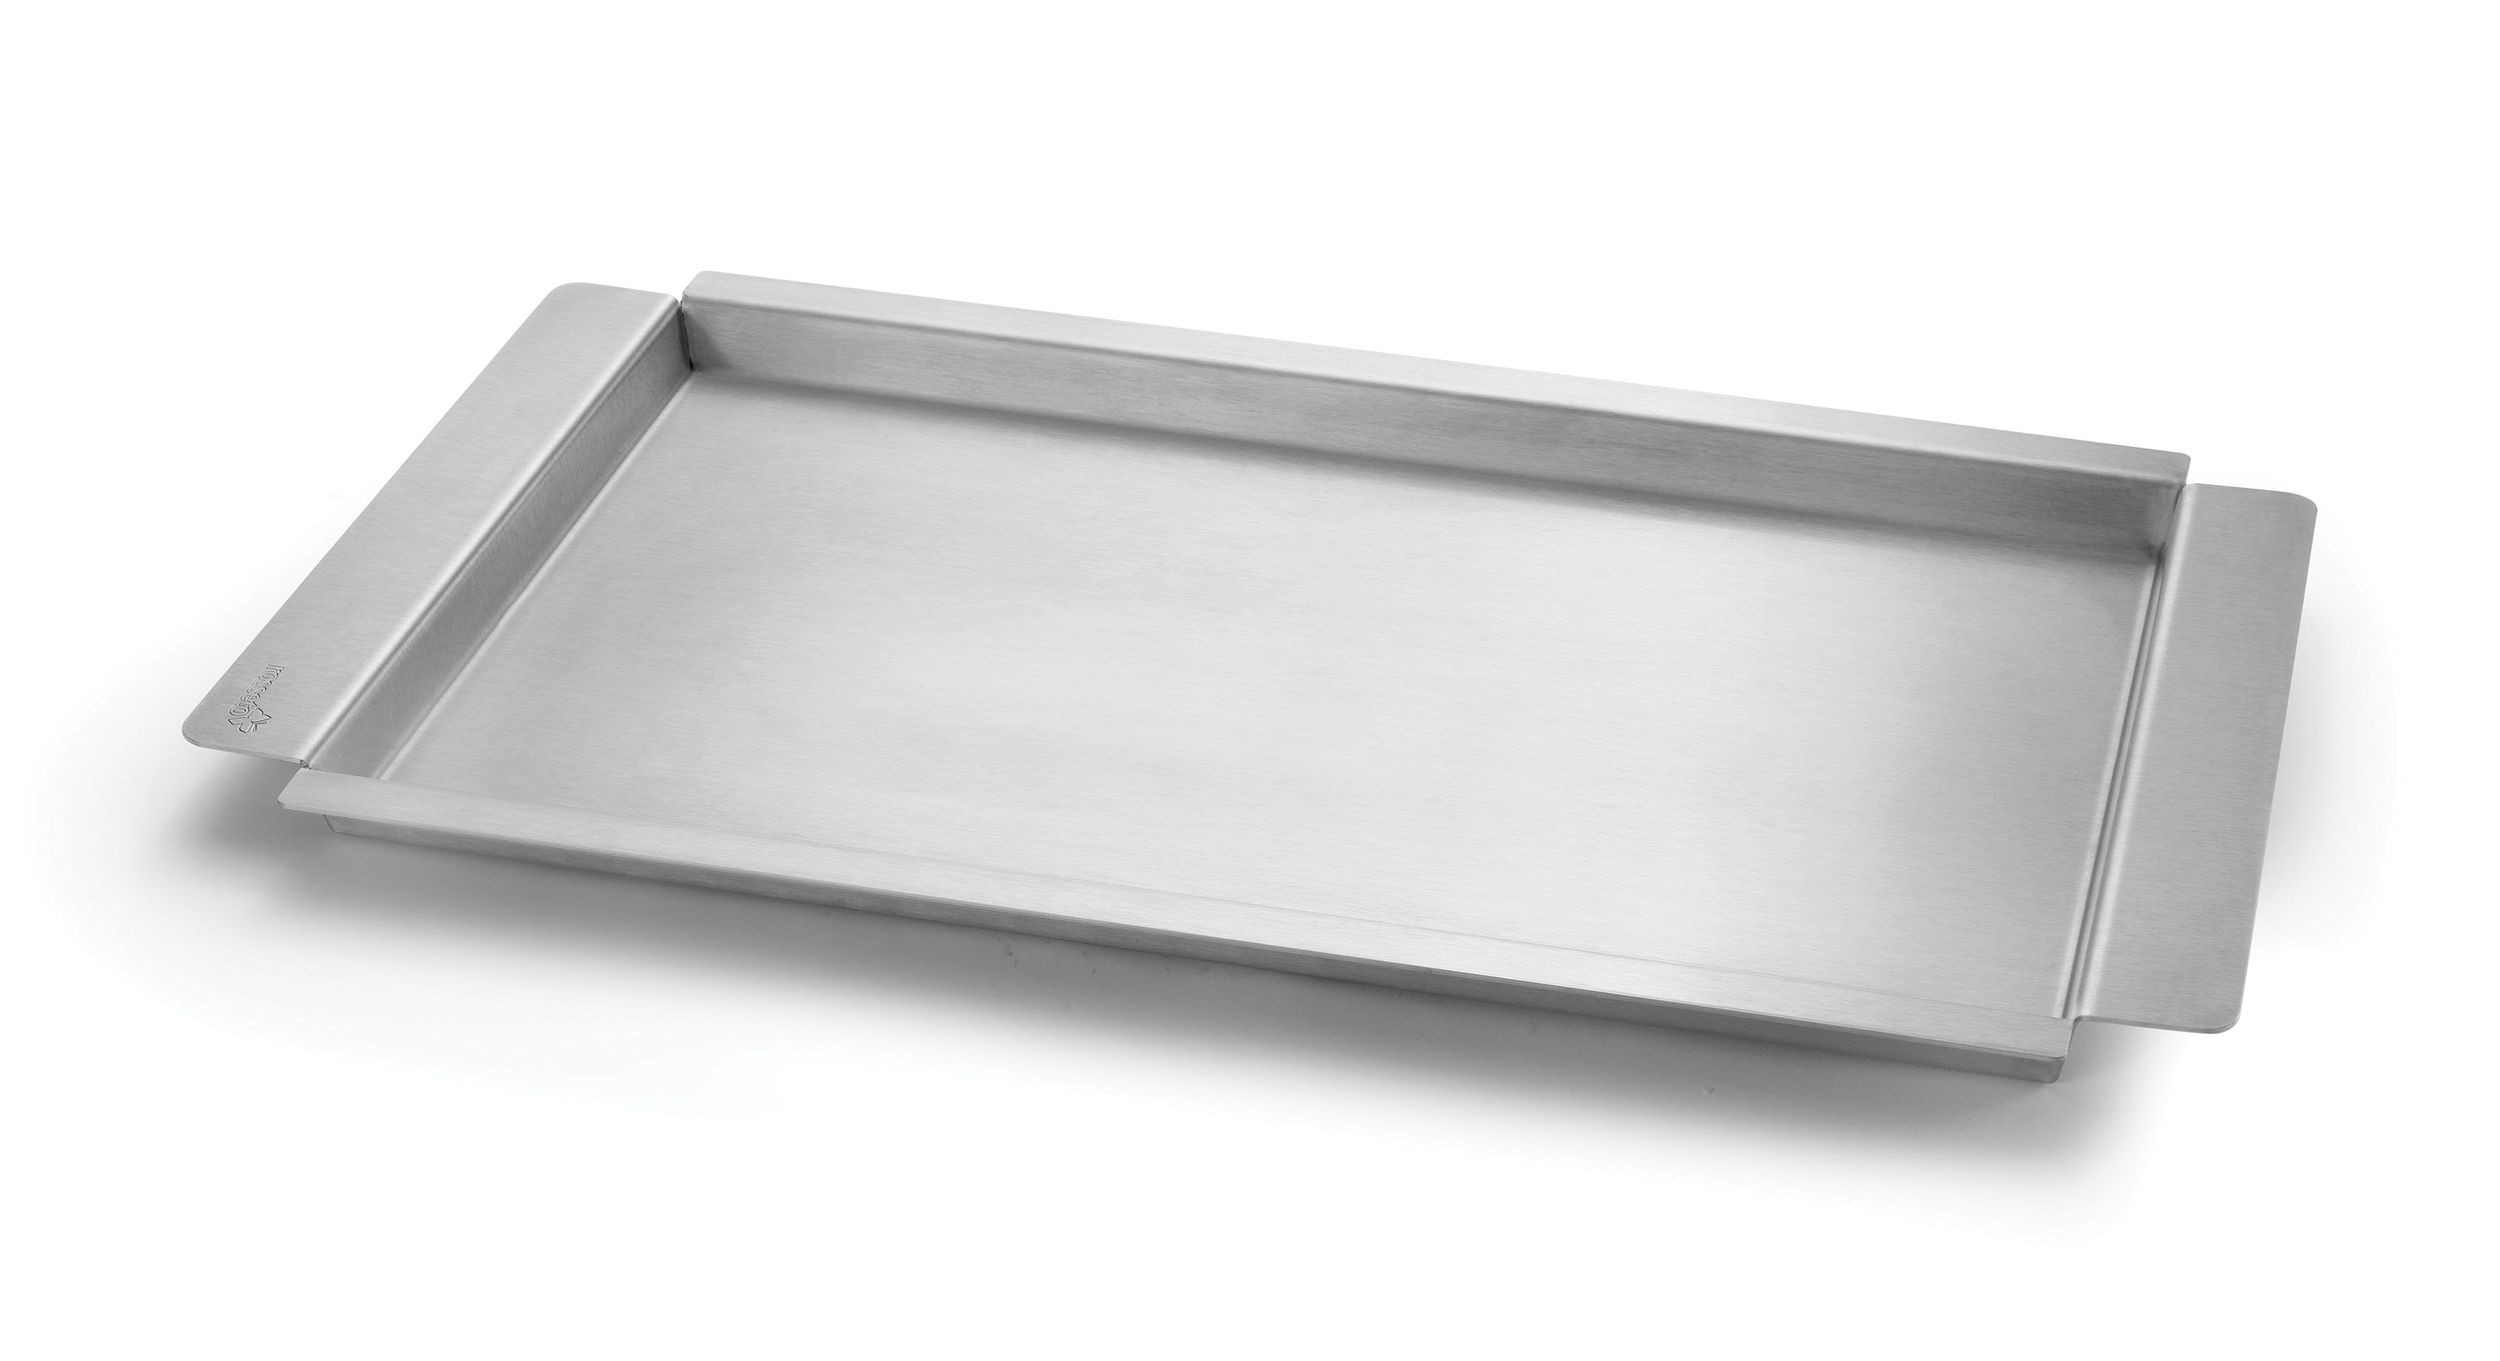 Rosseto SM217 Stainless Steel Griddle & Flatbread Tray for Multi-Chef Warmer 23" x 13.25" x 1"